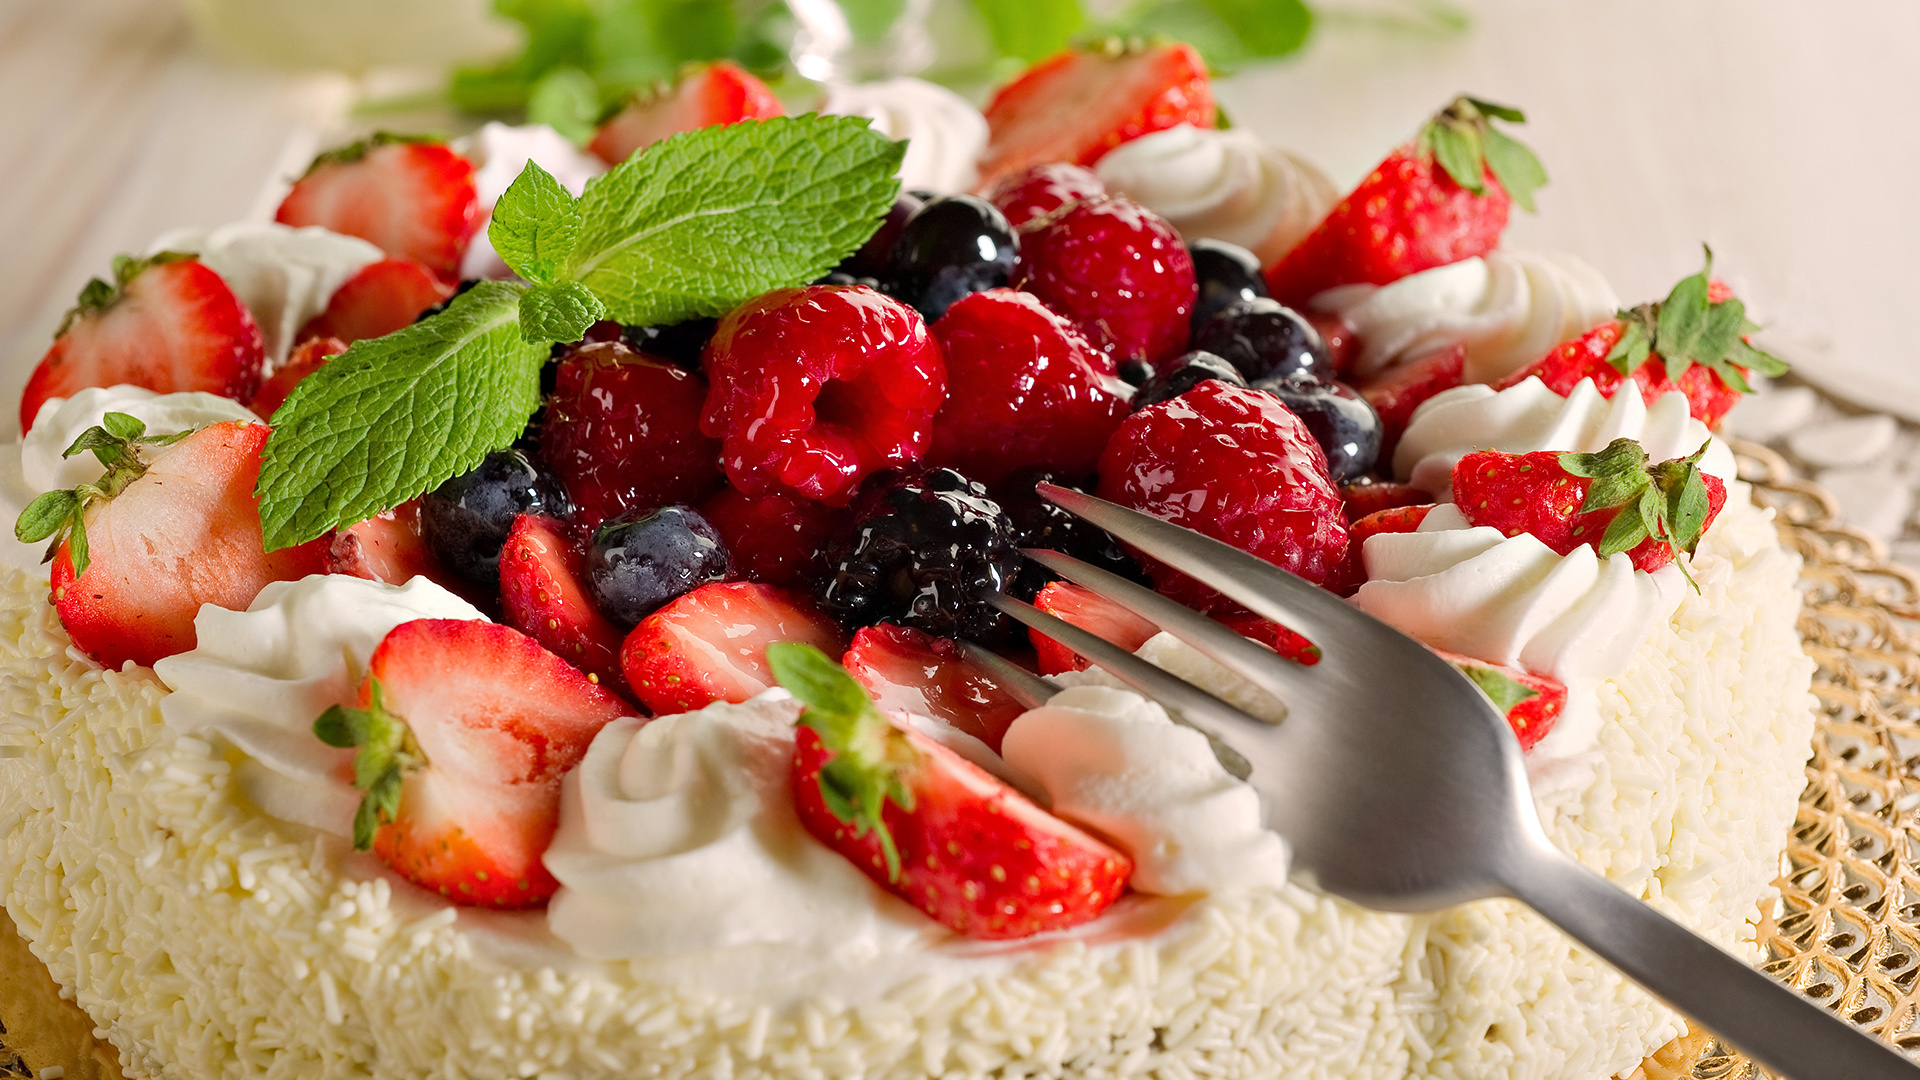 A delicious and tempting slice of cake, perfect for food lovers.